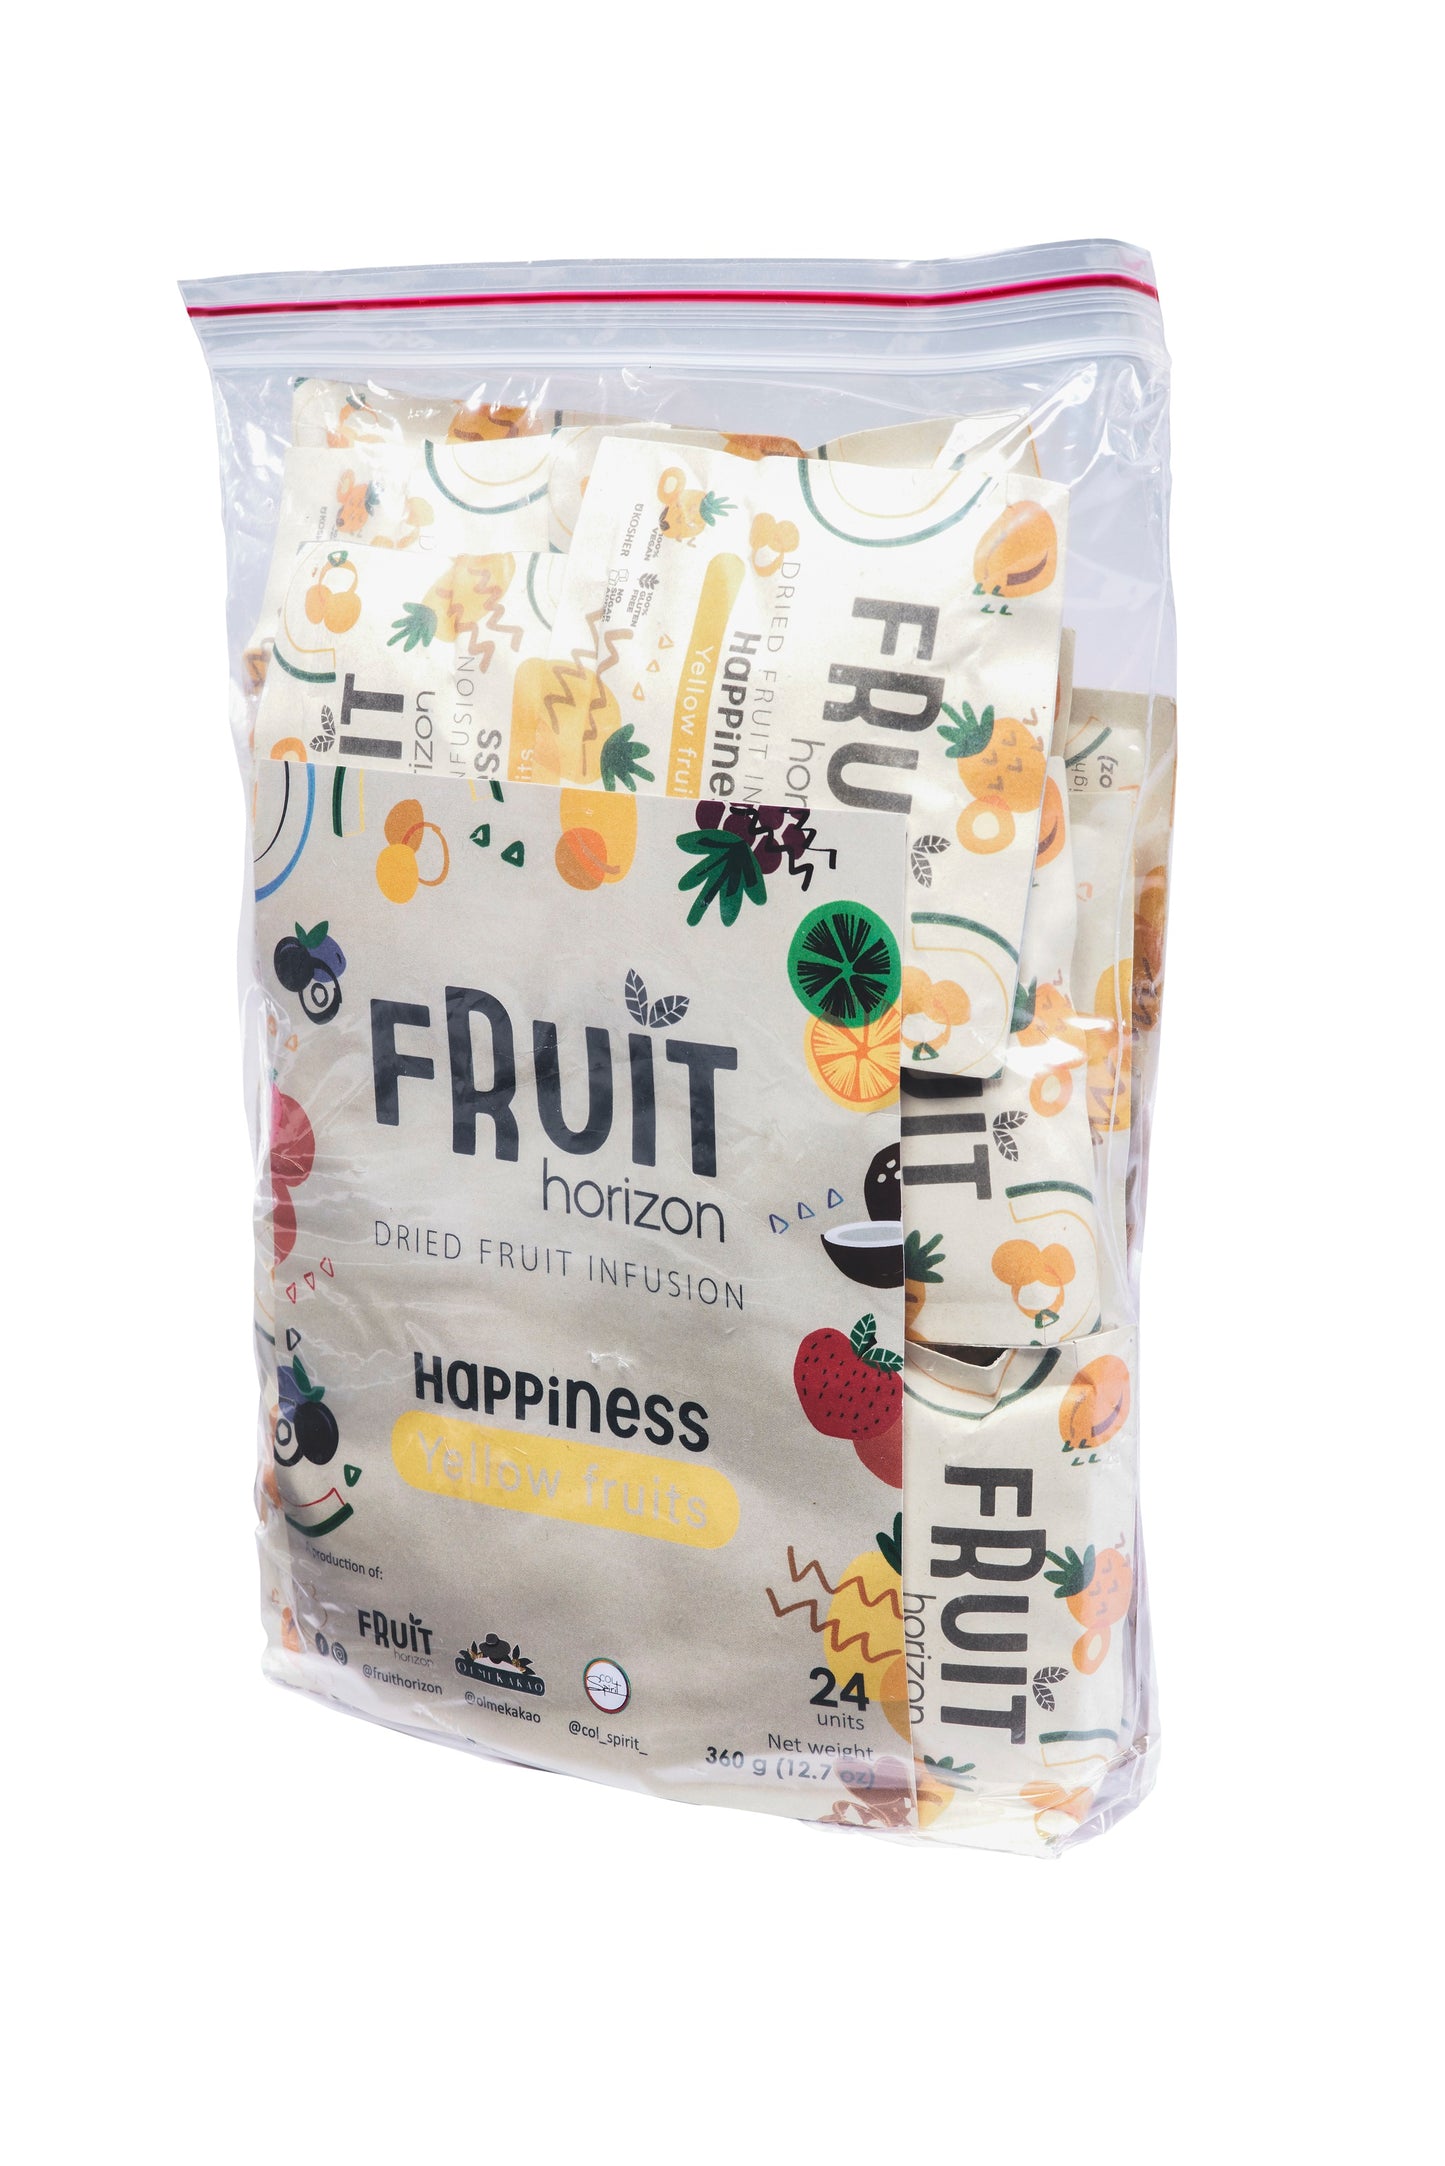 Fruit Horizon Fruit Infusion "Happiness" 24 pieces (refill pack for gift box)